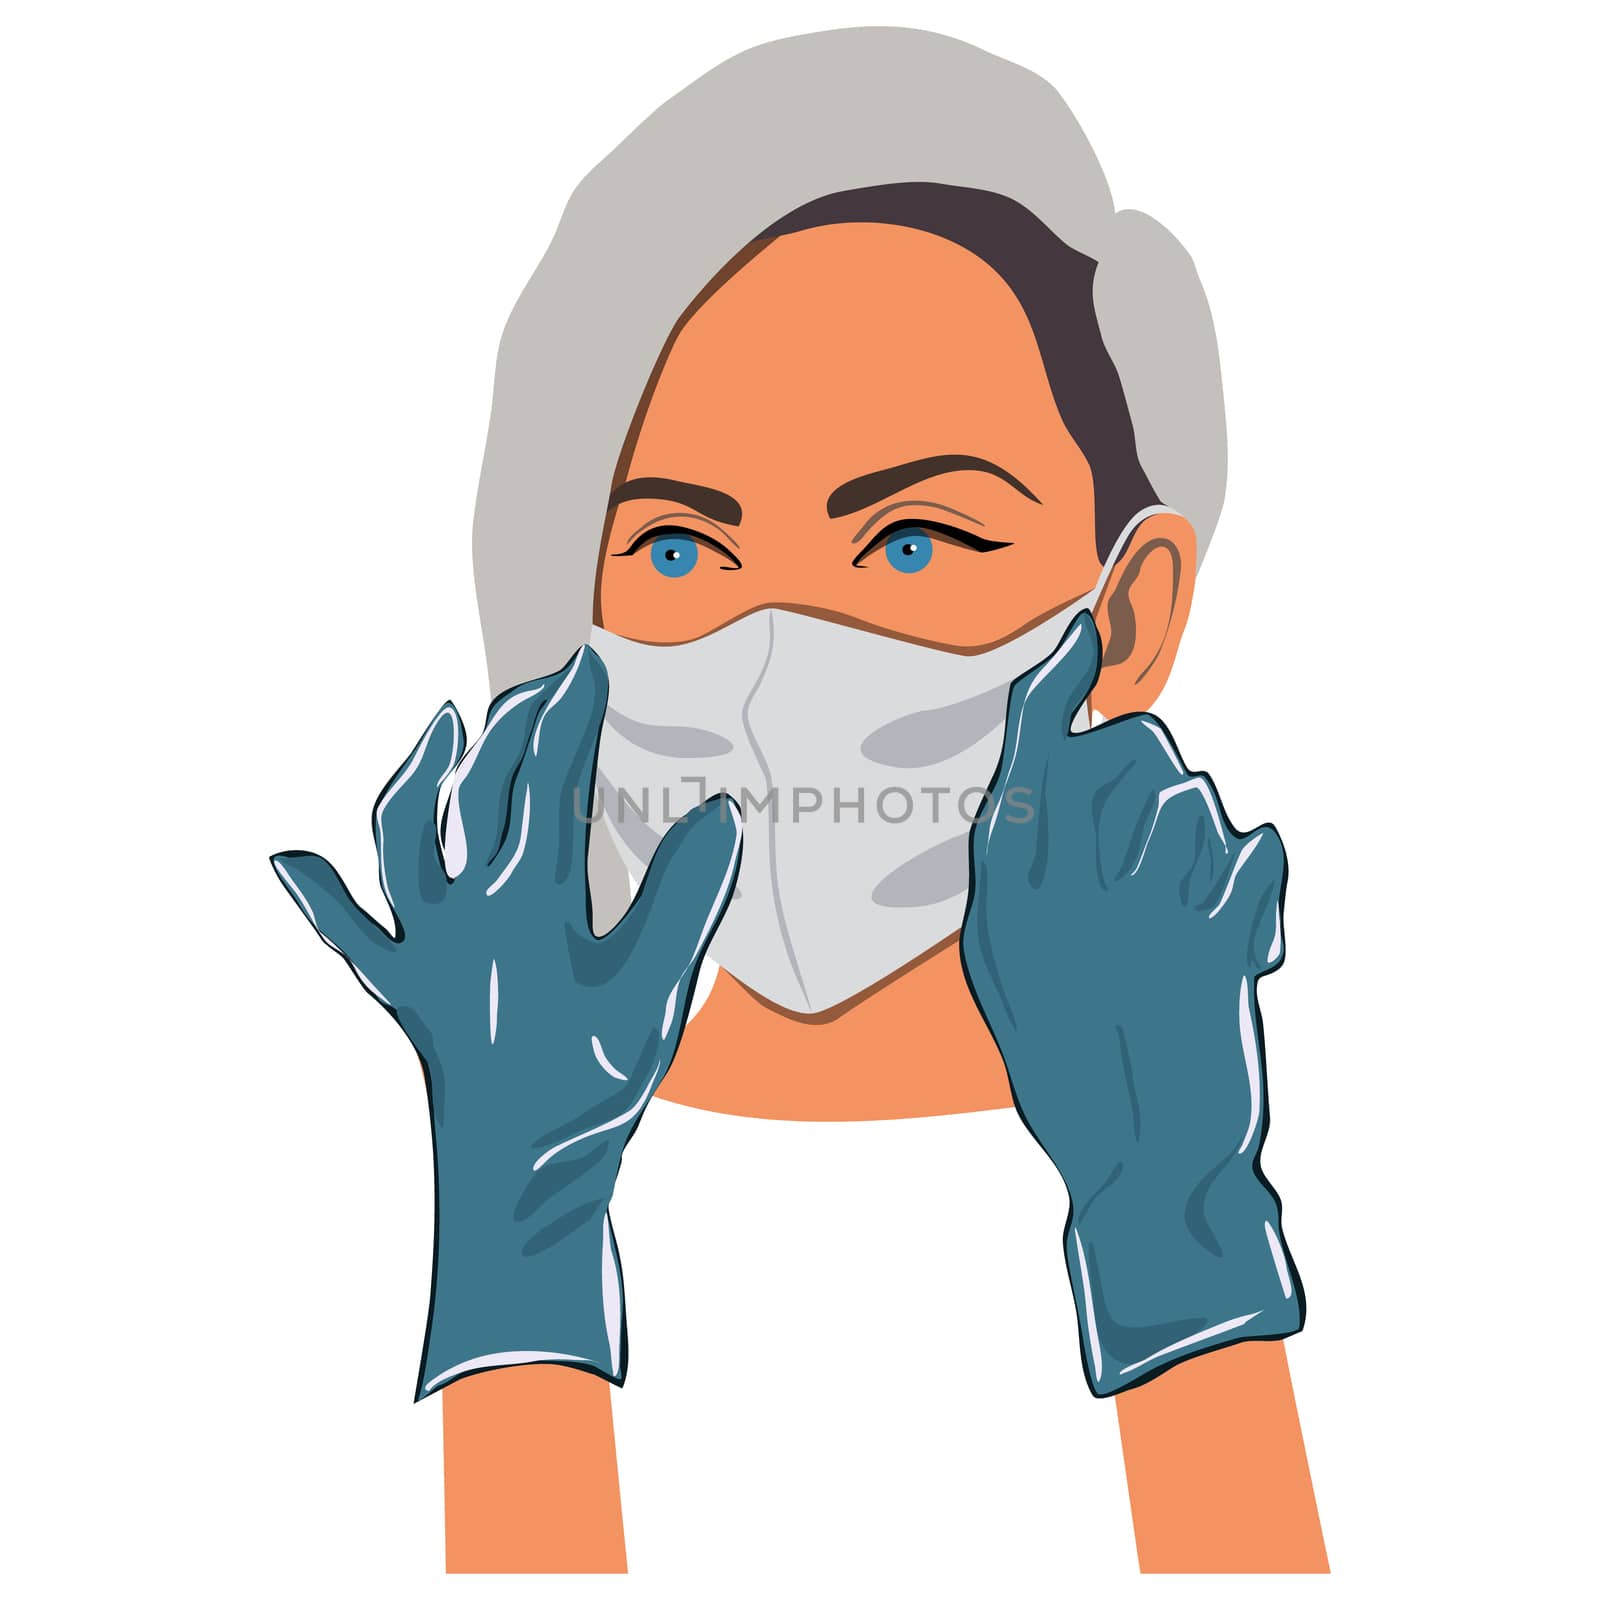 Female wearing protective medical mask with gloves. by Nata_Prando